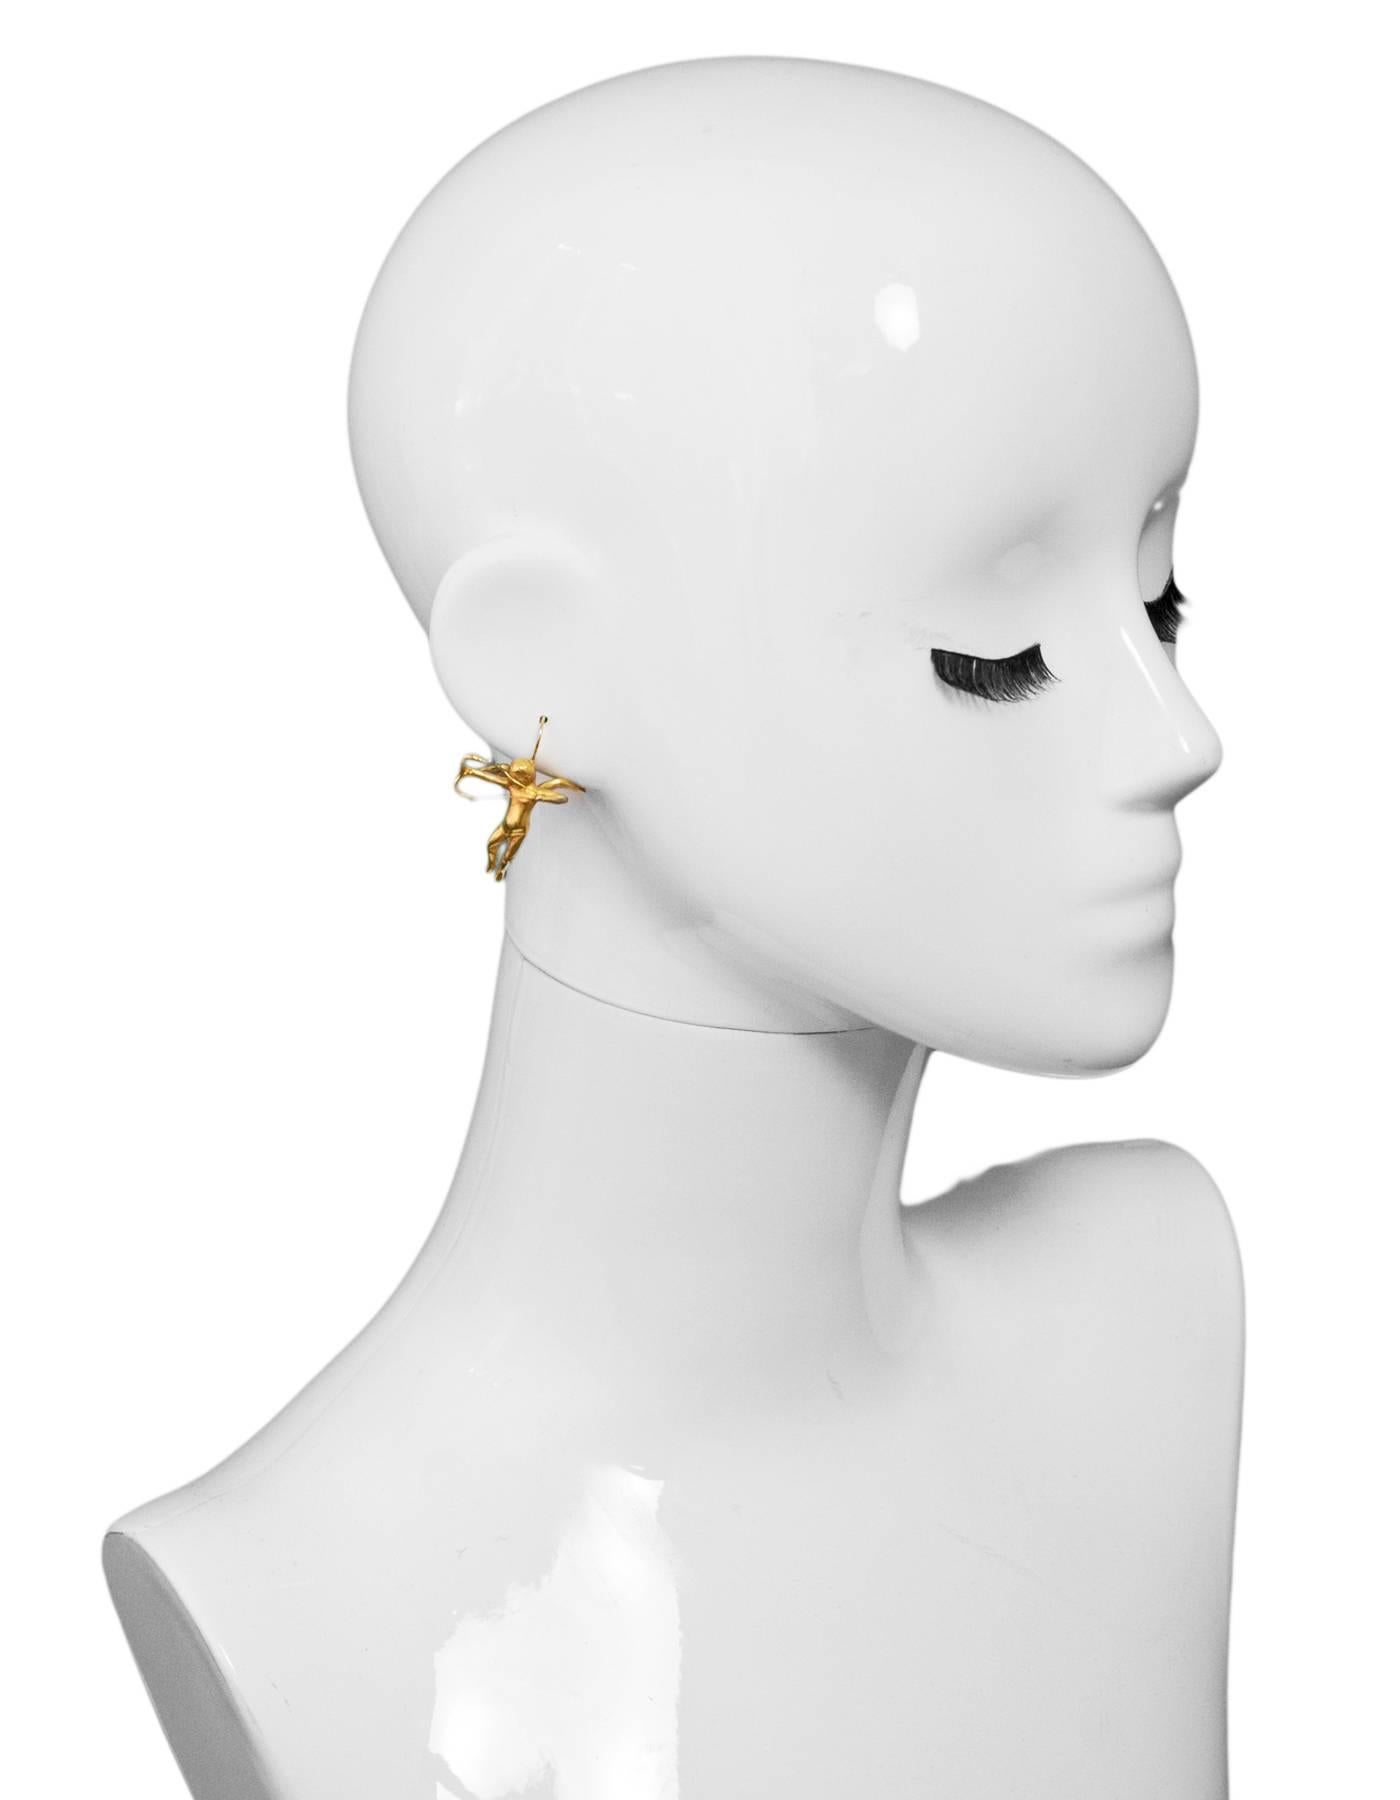 Gabriella Kiss 18k Yellow Gold Plated Vermeil Cupid Earrings

Color: Yellow
Materials: 18k yellow gold
Closure: Pierced/ french hooks
Retail Price: $400 + tax
Overall Condition: Excellent pre-owned condition with the exception of some surface